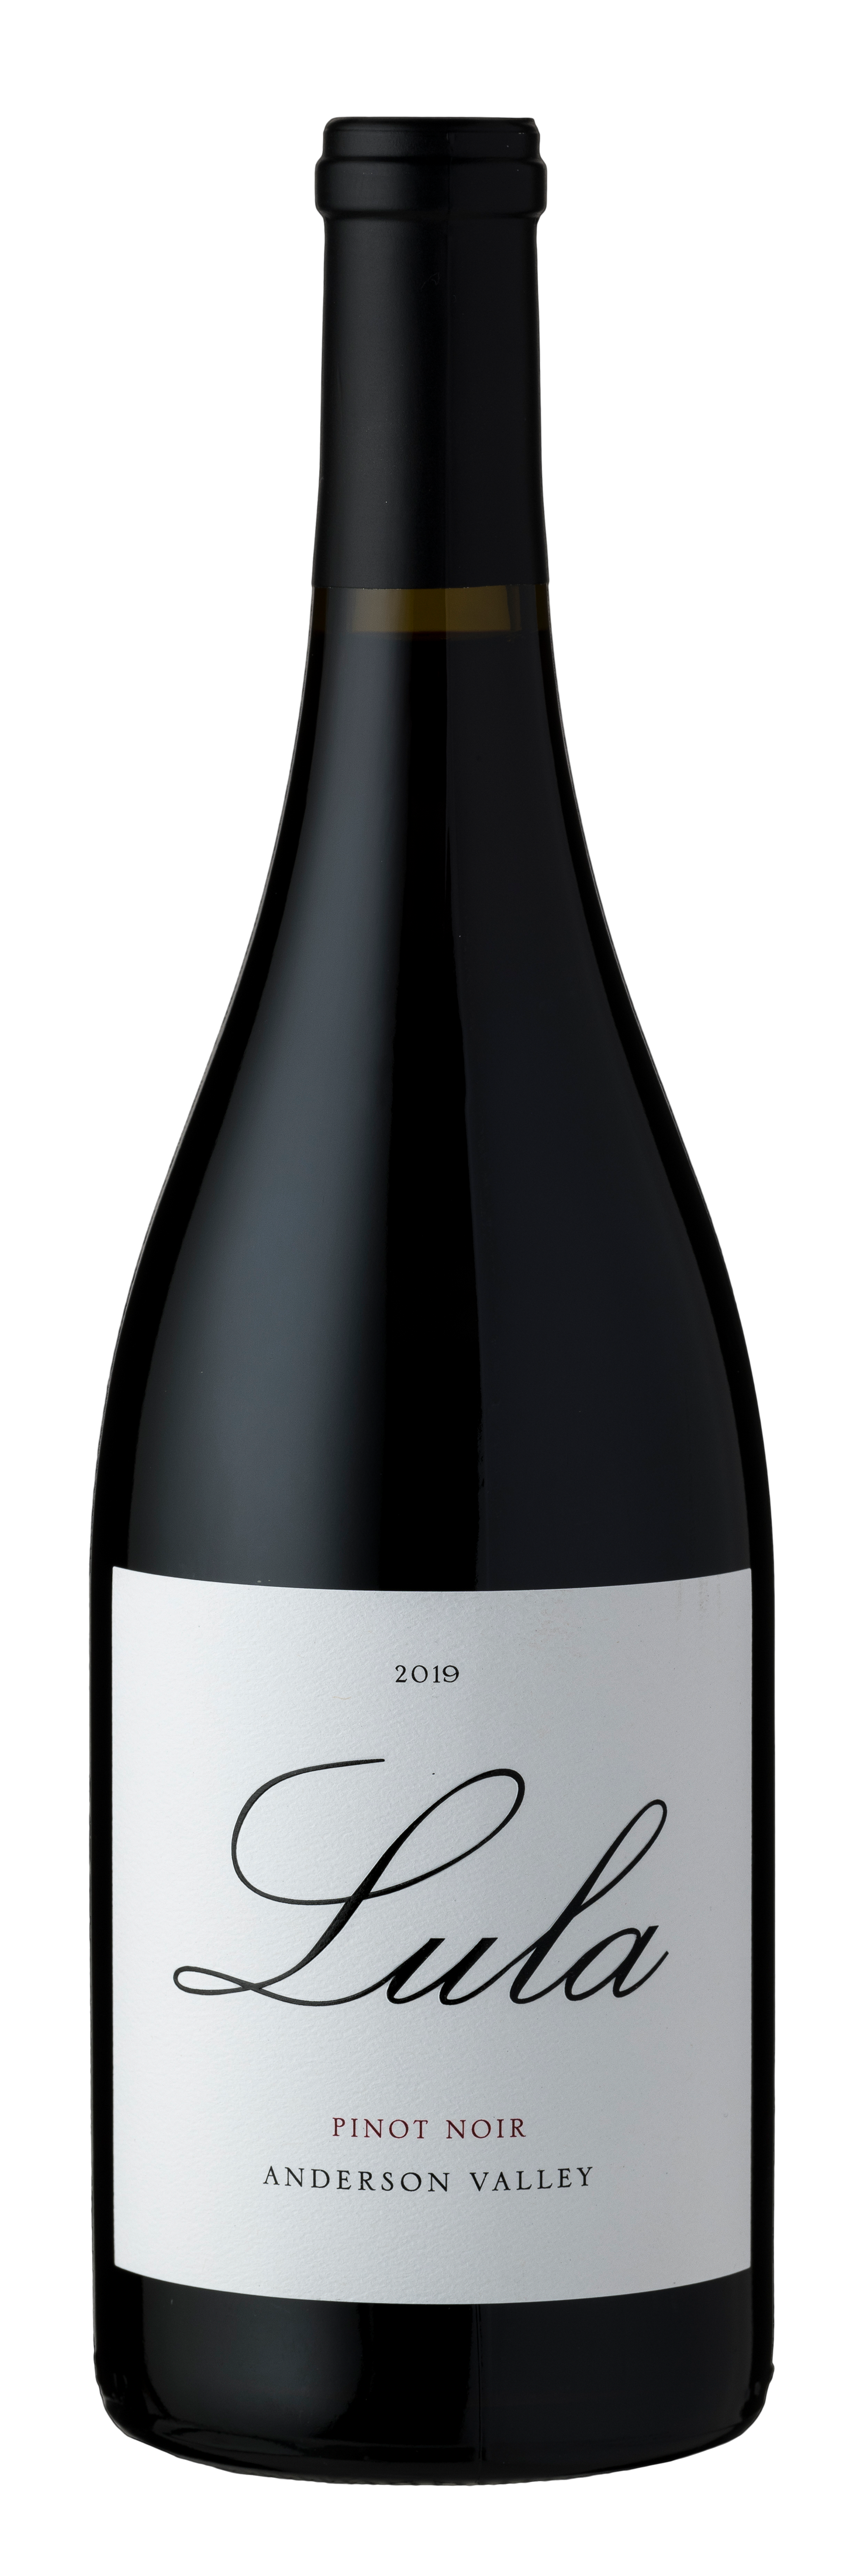 Product Image for 2019 Anderson Valley Pinot Noir